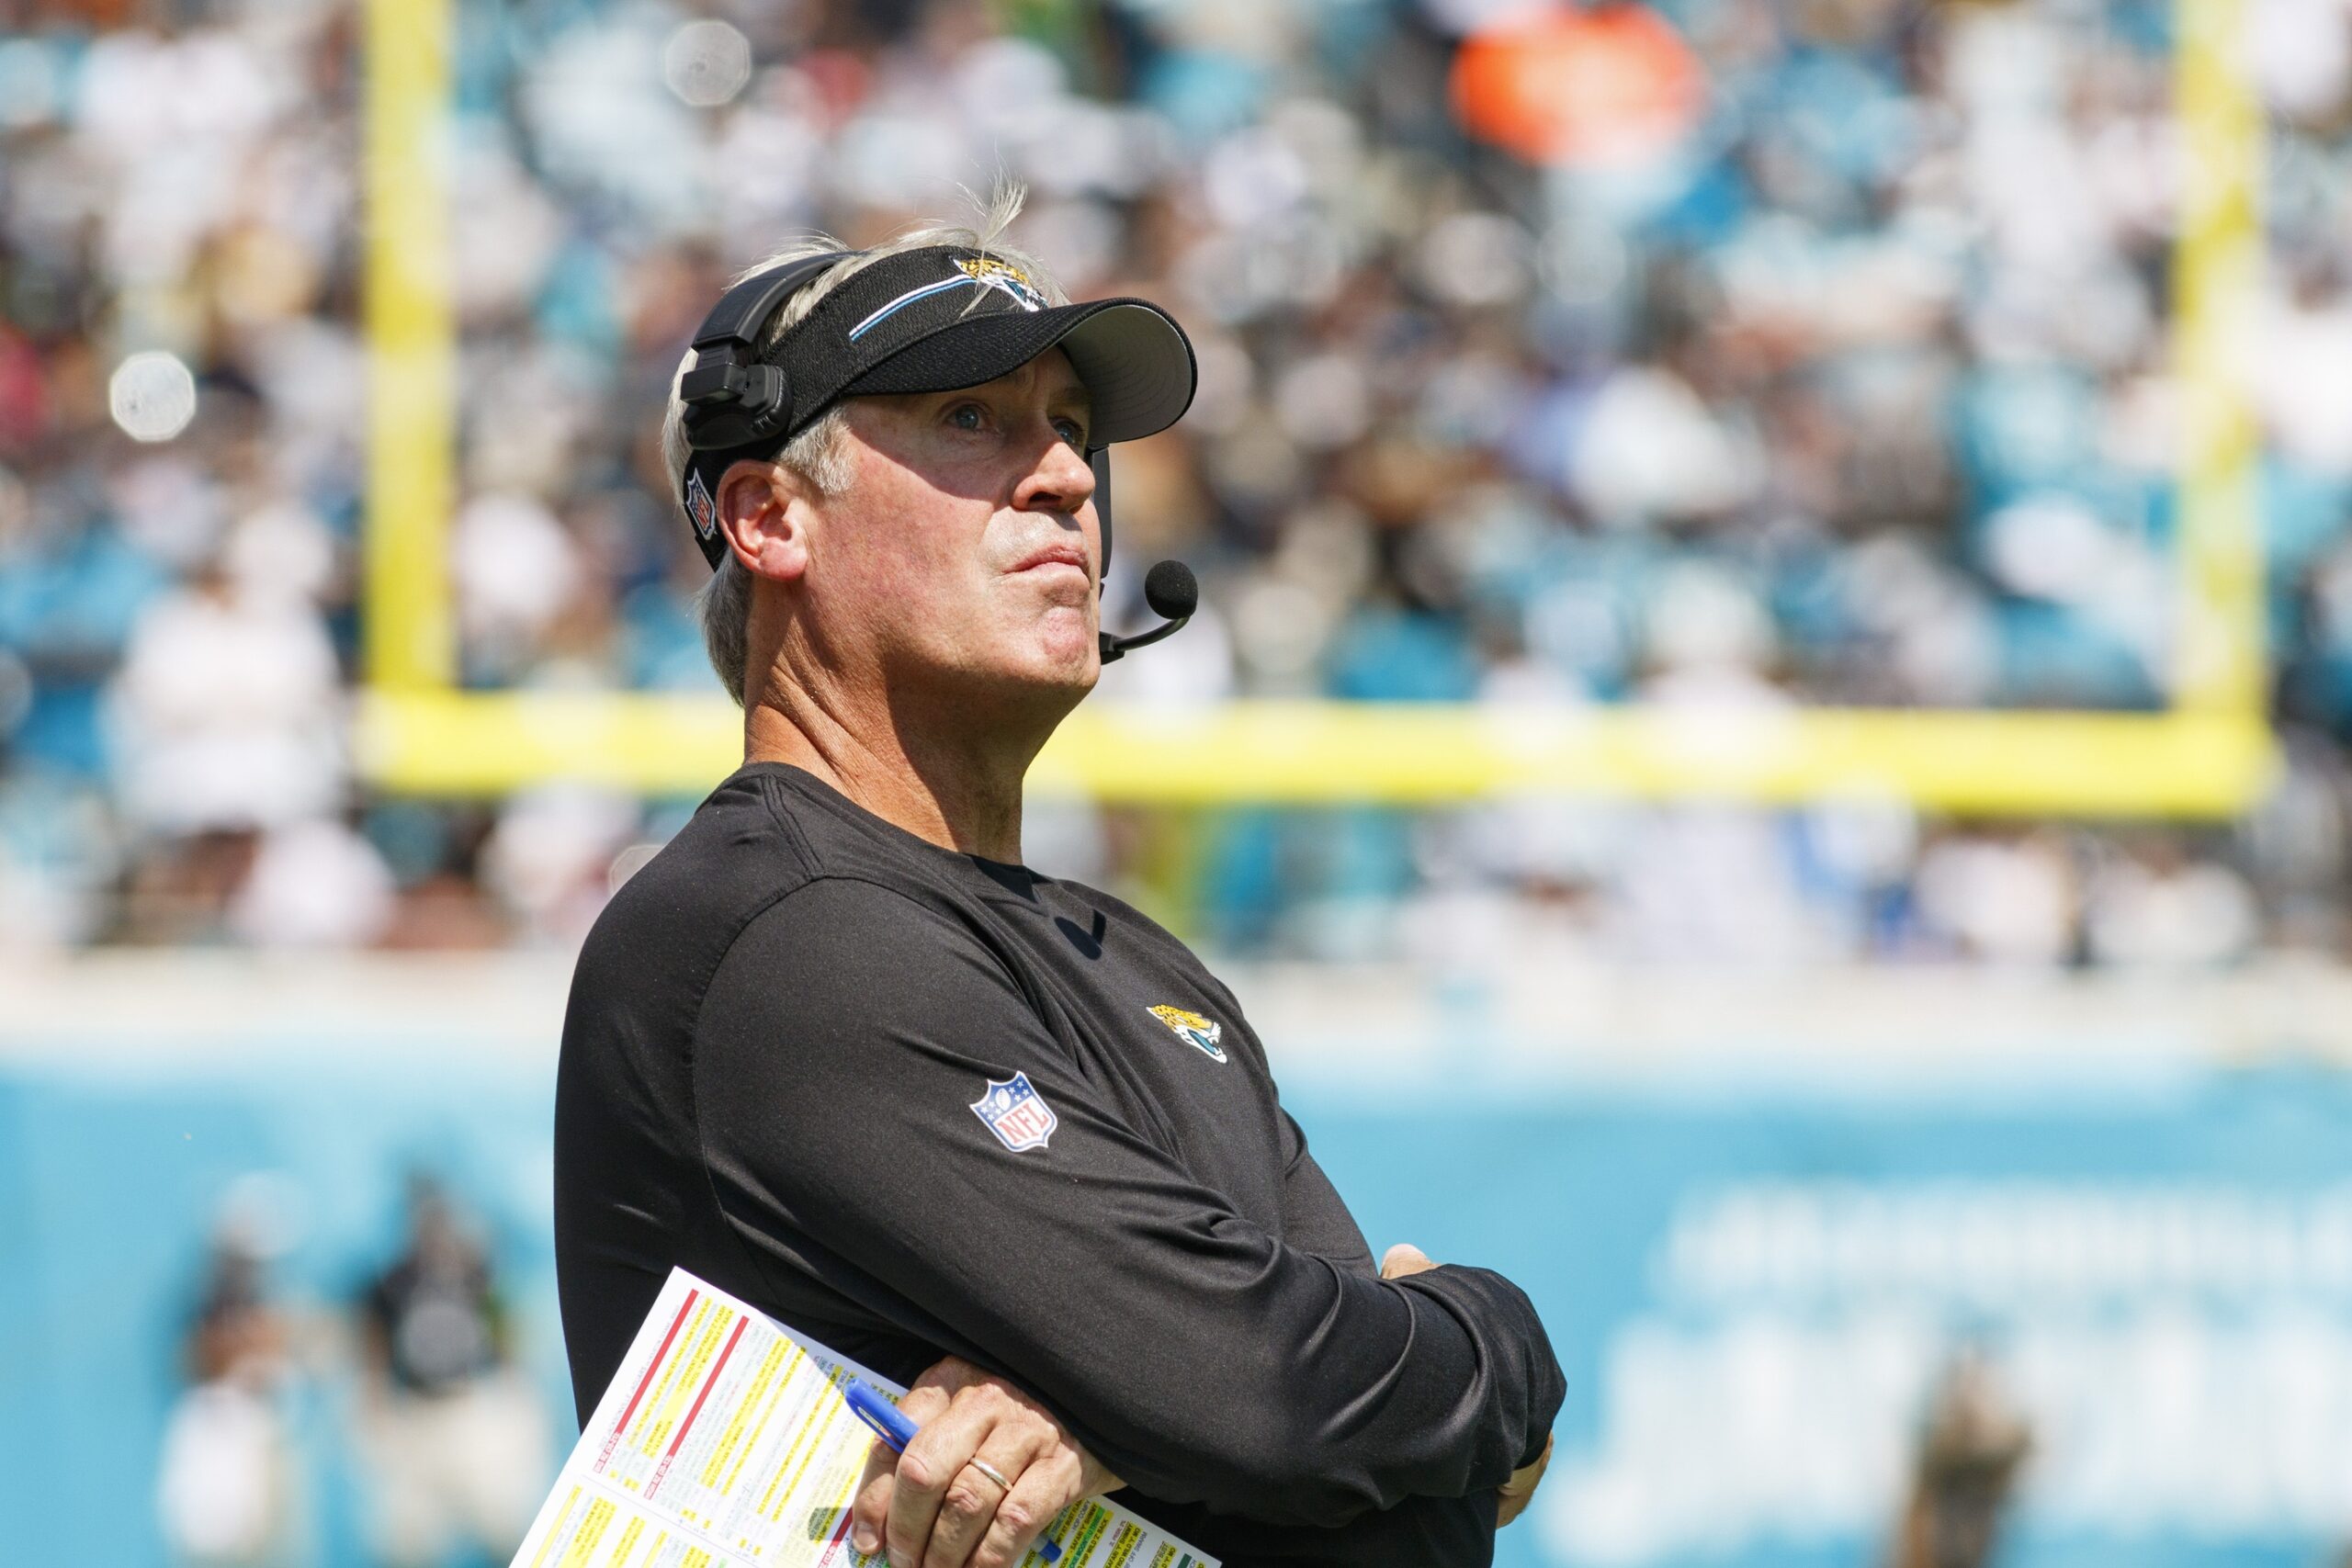 Jaguars head into Doug Pederson's 2nd season with 'so much